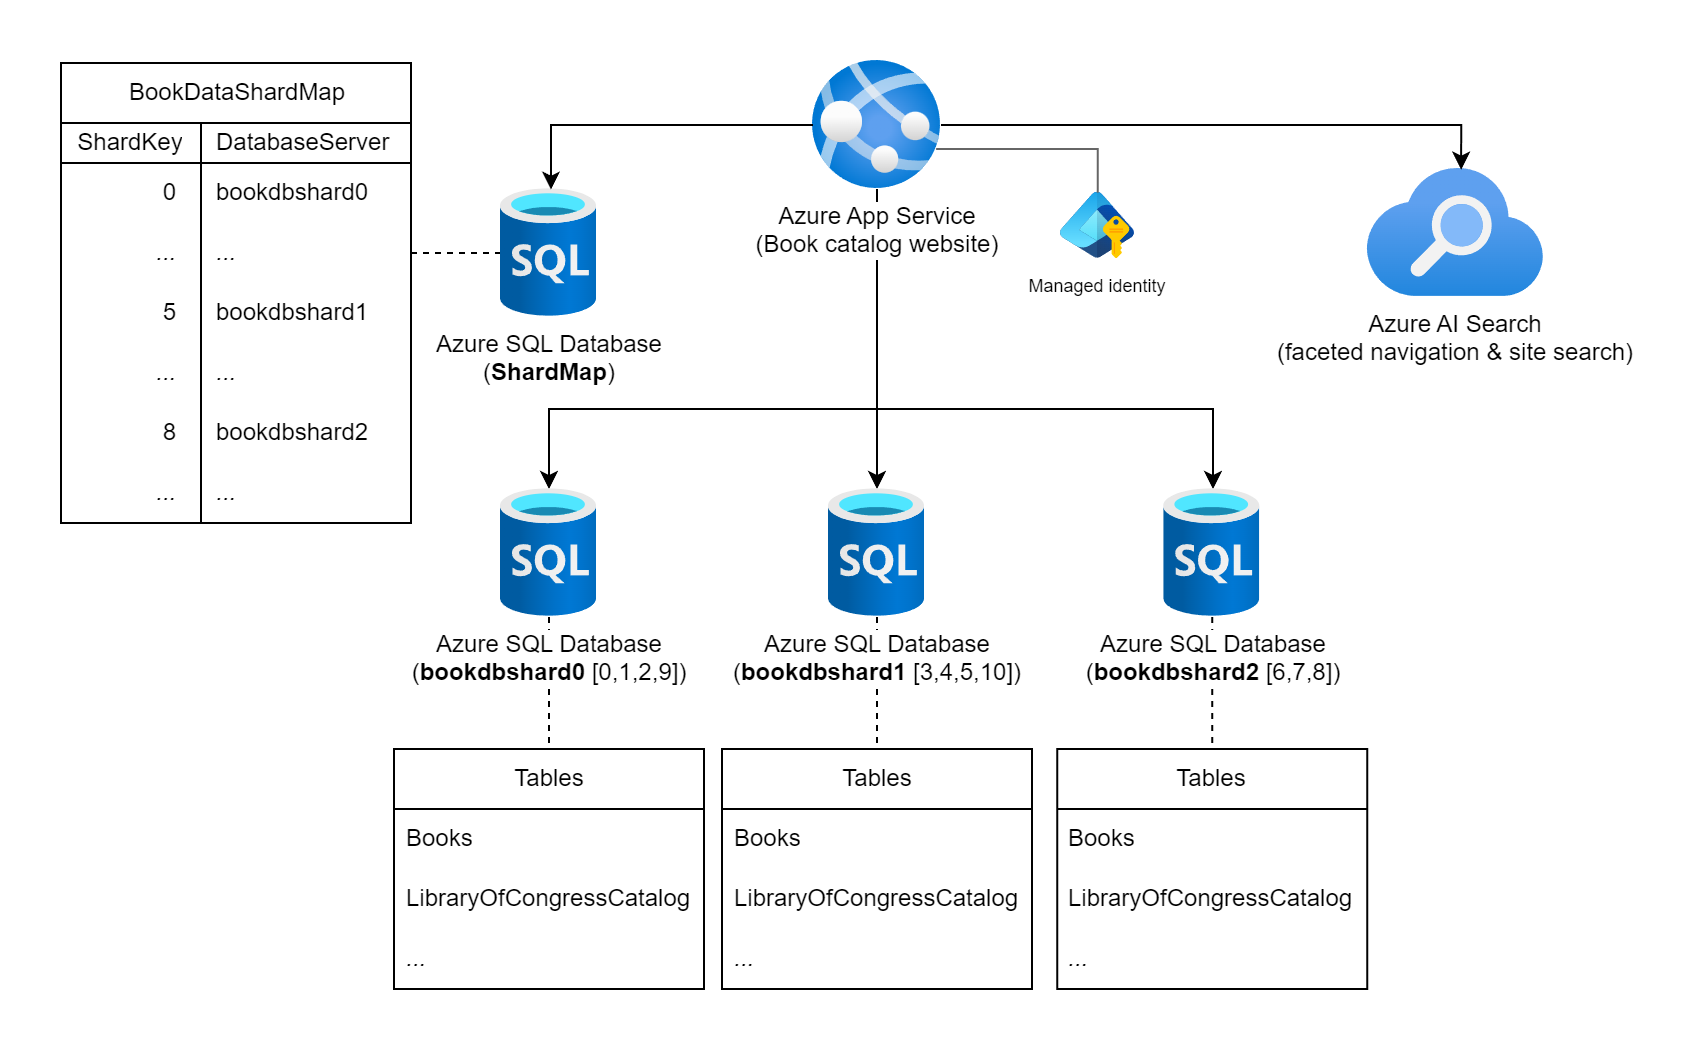 Diagram that shows an Azure App Service, four Azure SQL Databases, and one Azure AI Search.